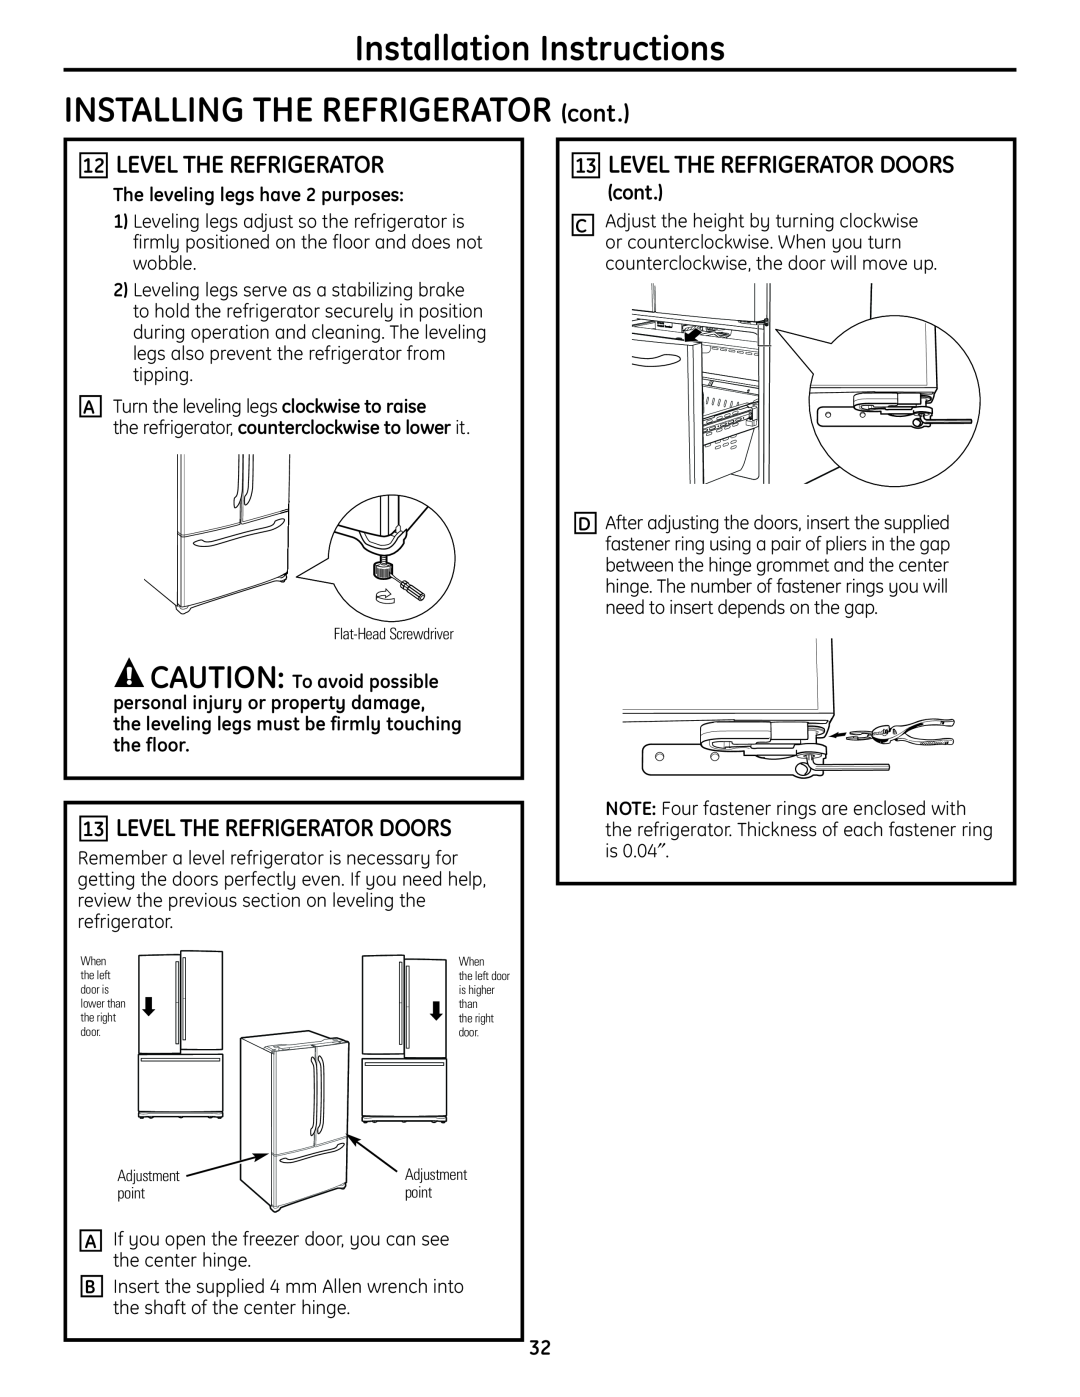 GE PFSS6SMXSS operating instructions Level The Refrigerator Doors, The leveling legs have 2 purposes, cont 